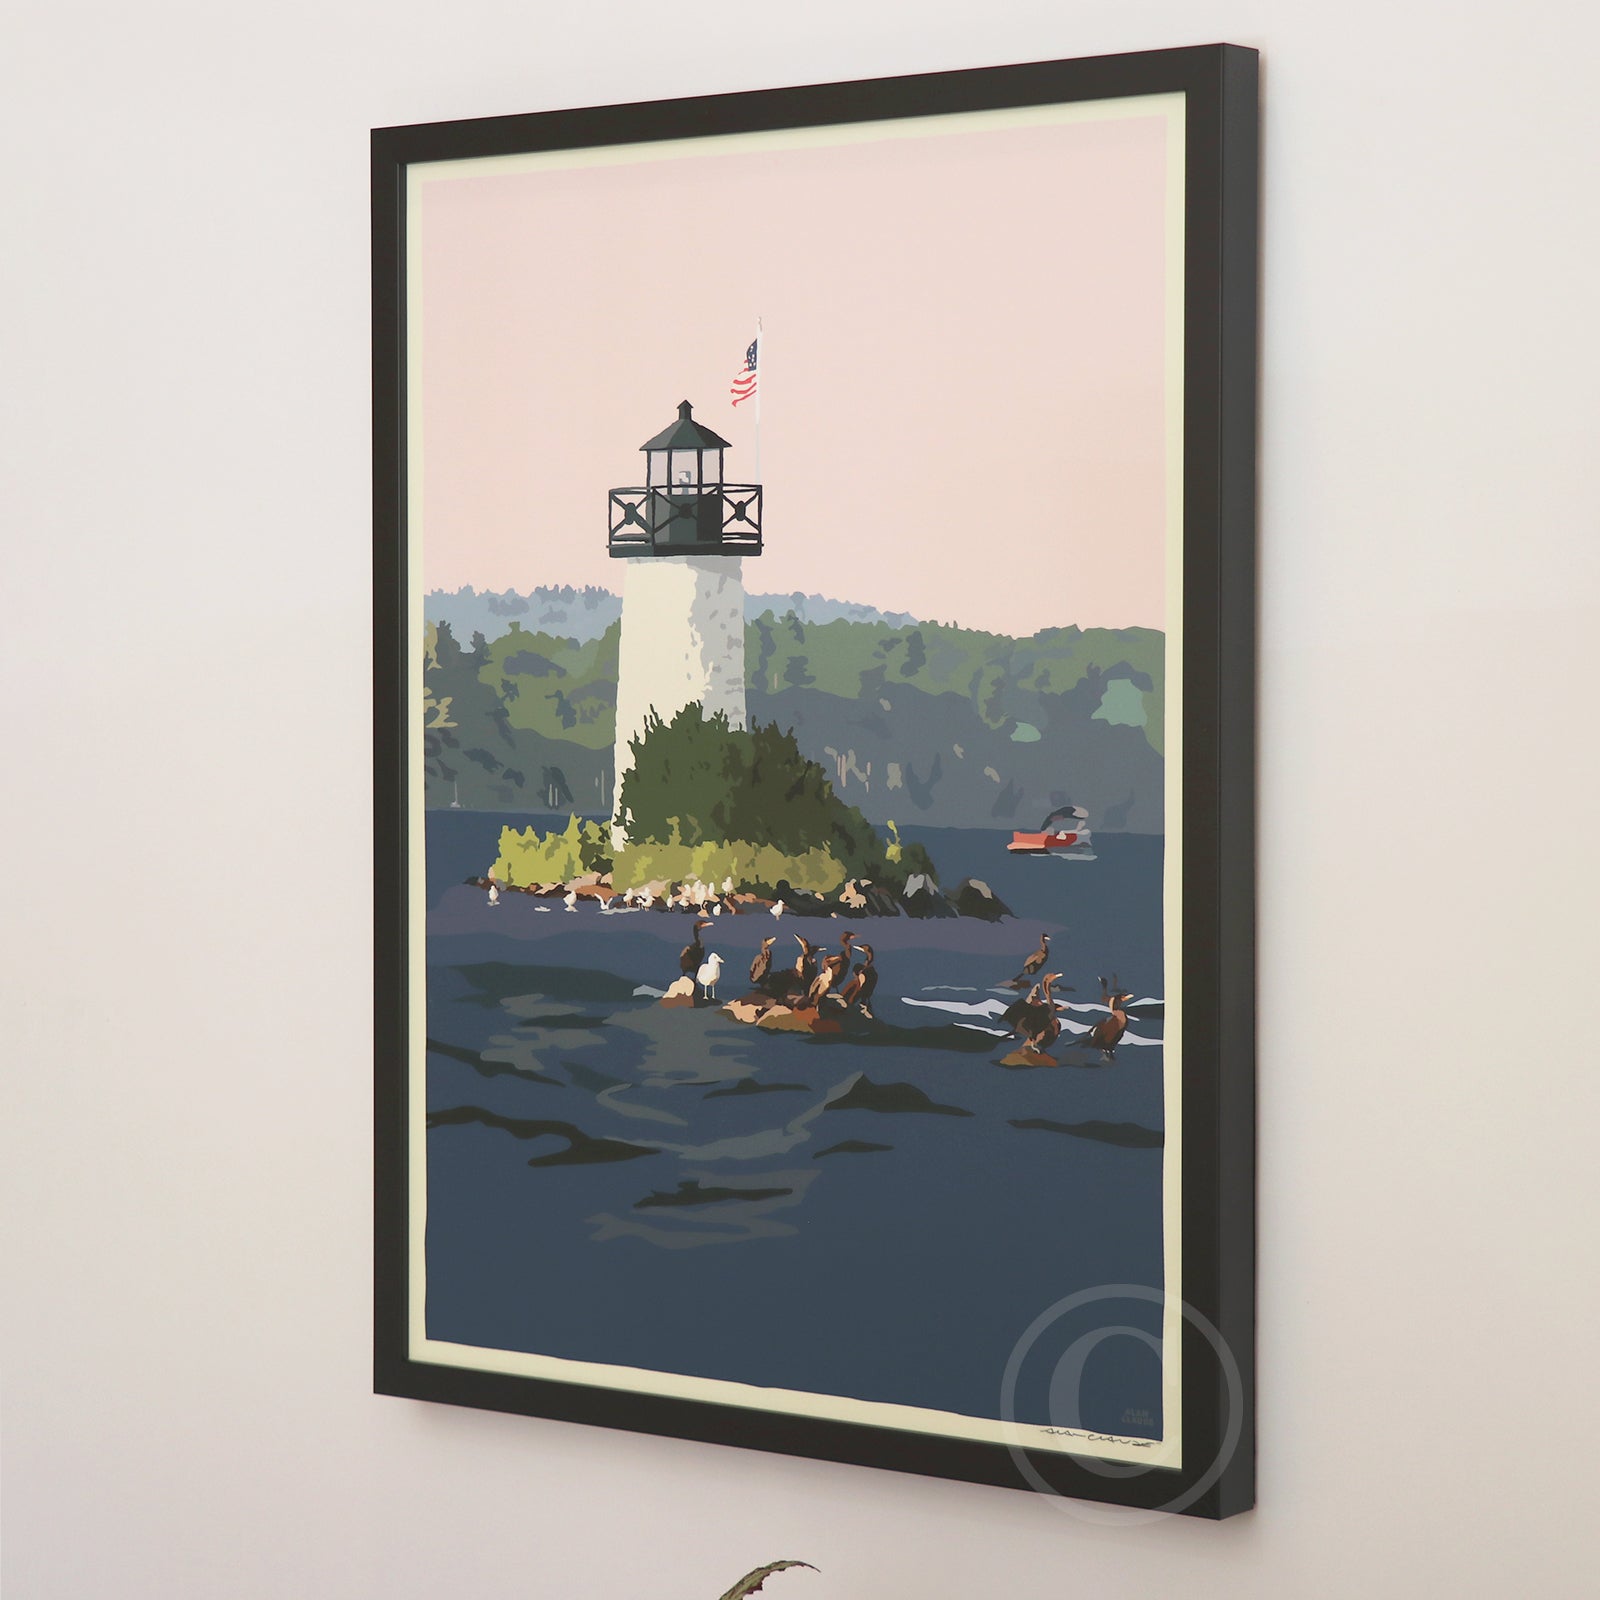 Sunset at Ladies Delight Lighthouse Art Print 18" x 24” Vertical Framed Wall Poster By Alan Claude - Maine